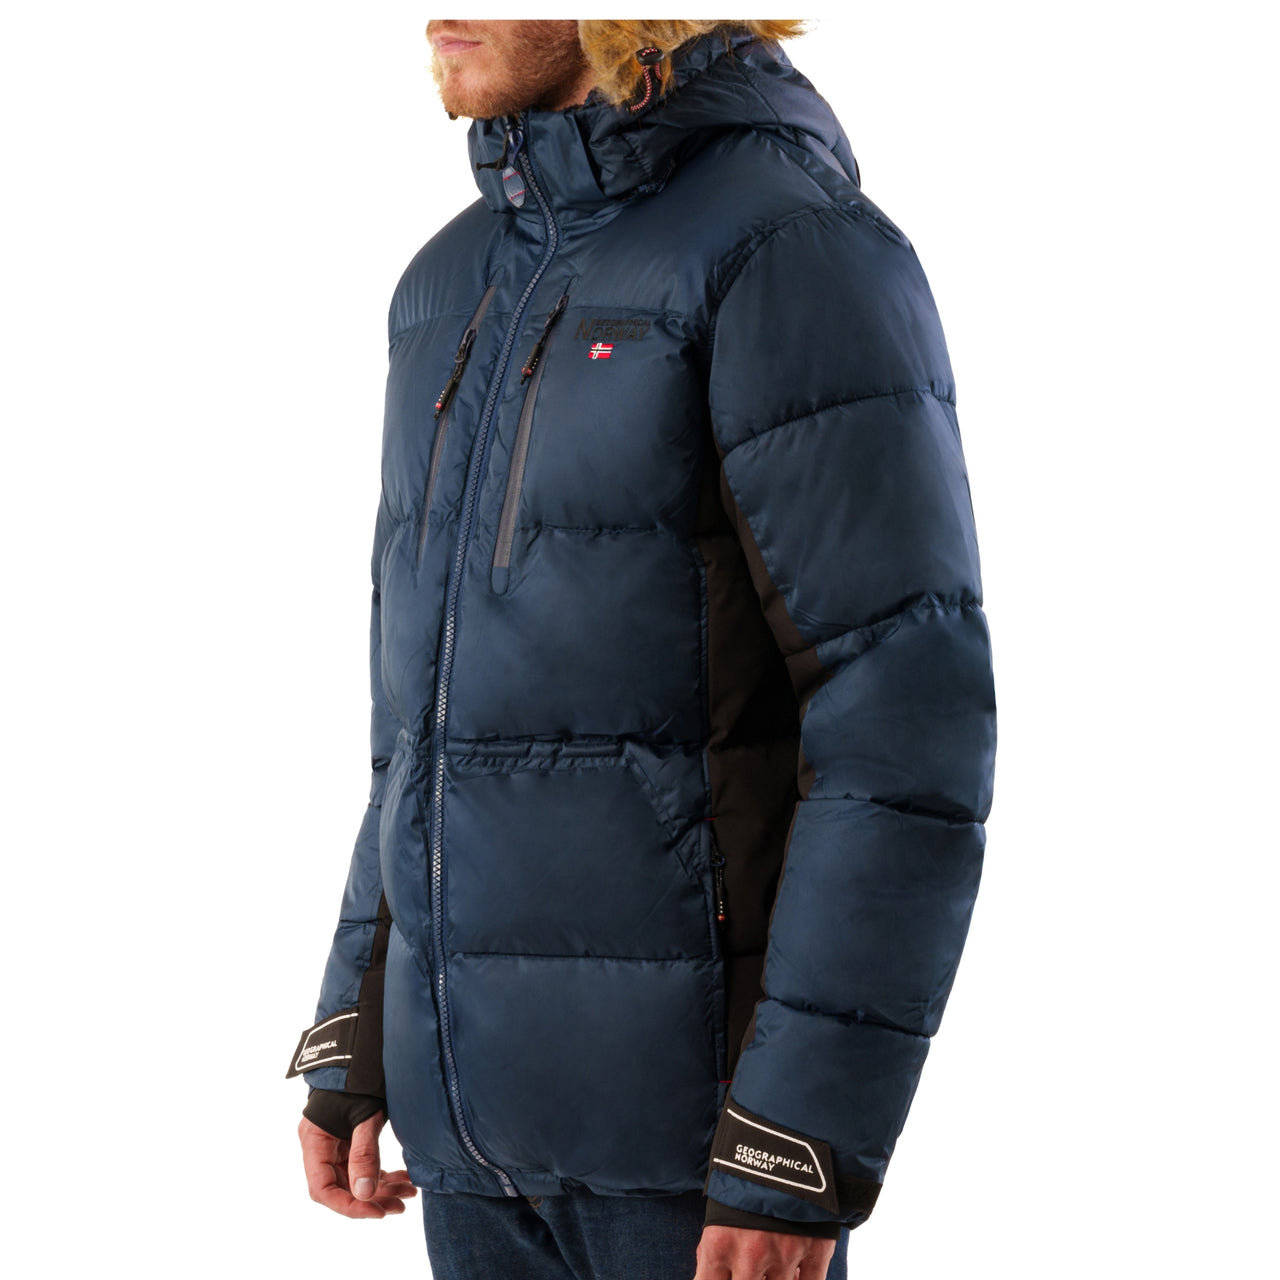 Geographical Norway Hombre Softshell Lluvia Chaqueta para Exterior S-7XL